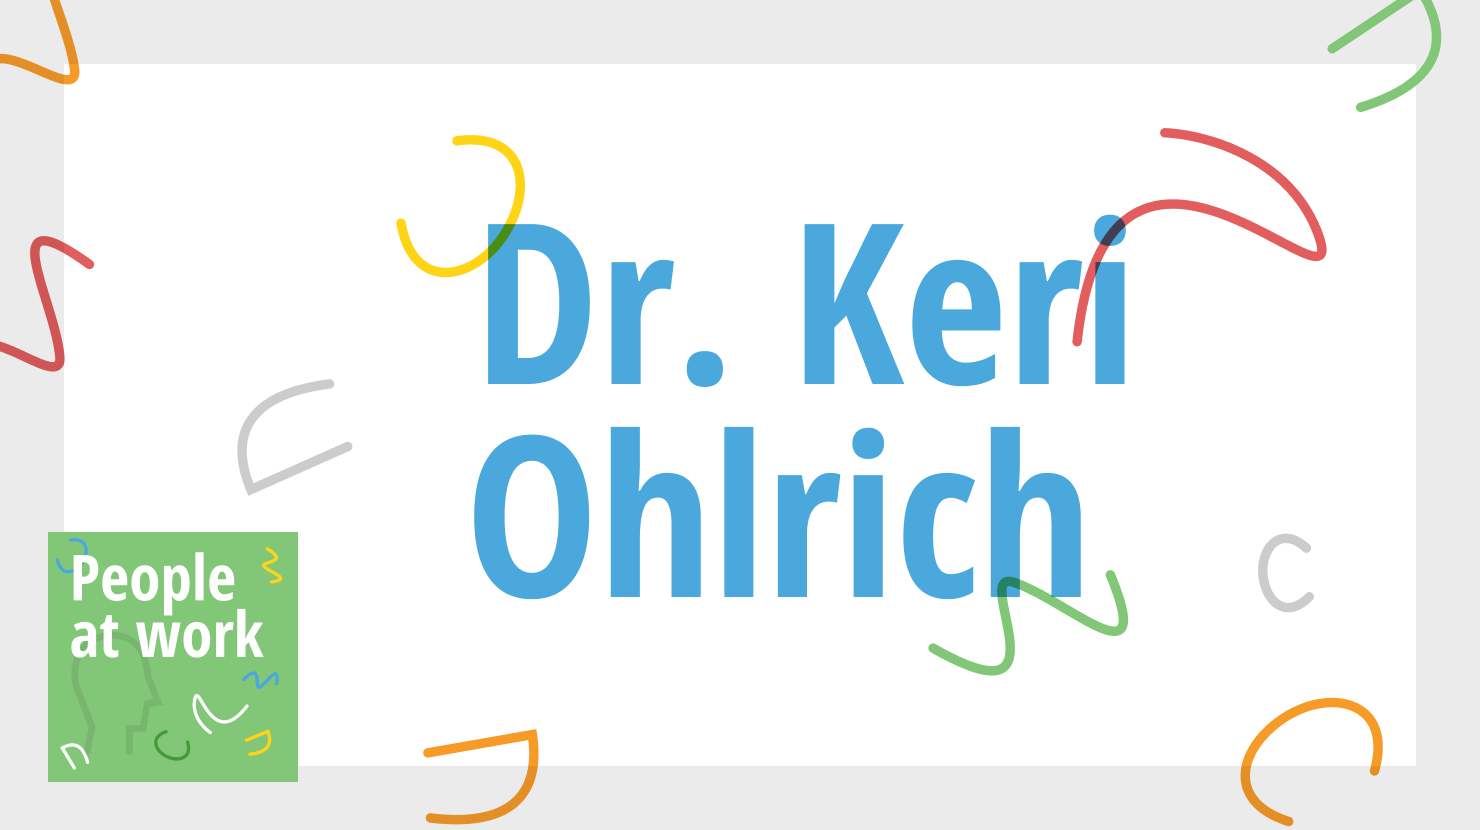 A radical way to think about employee engagement with Dr. Keri Ohlrich